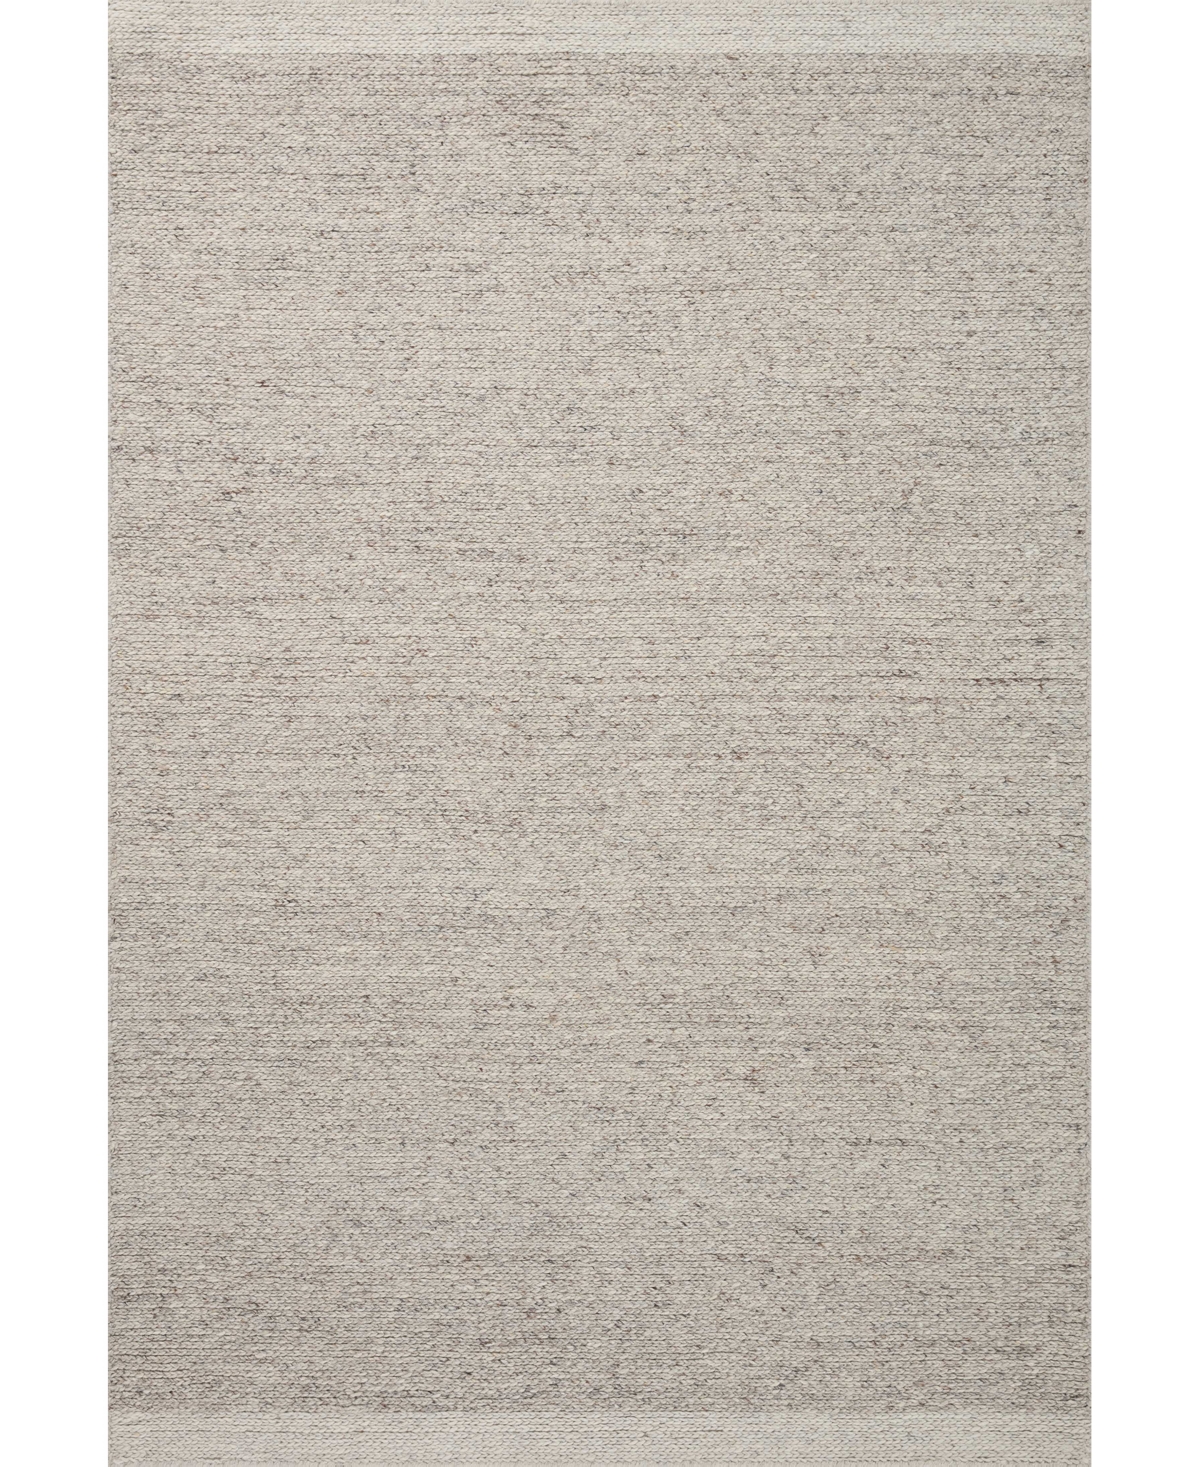 Magnolia Home By Joanna Gaines X Loloi Ashby Ash-03 5' X 7'6" Area Rug In Silver